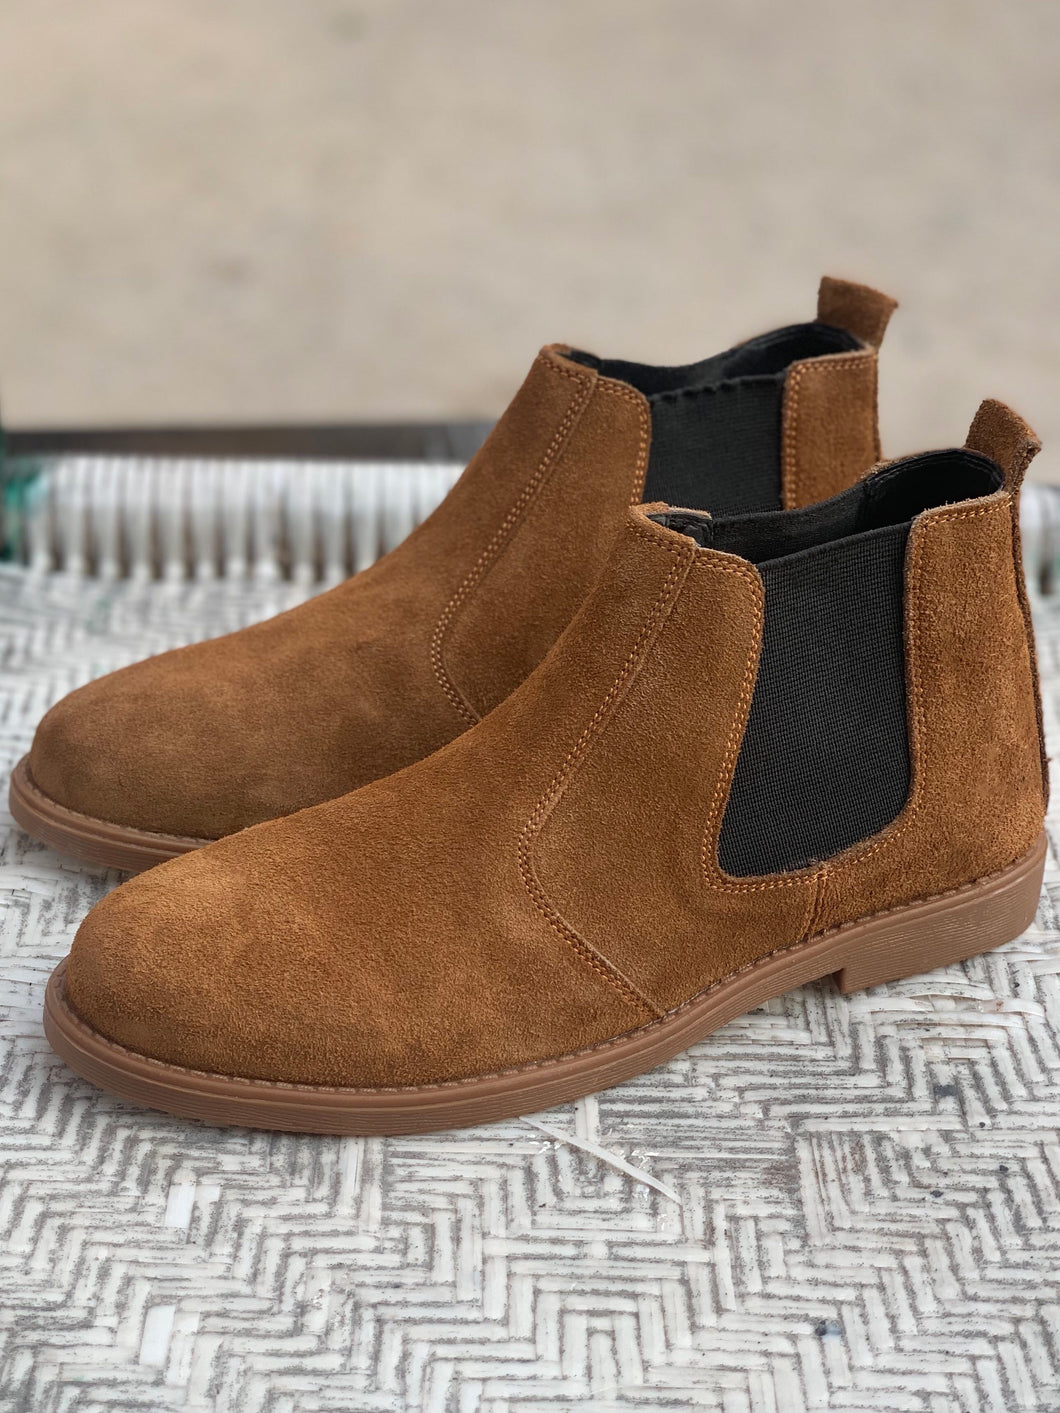 Camel Suede Leather Chelsea Boots